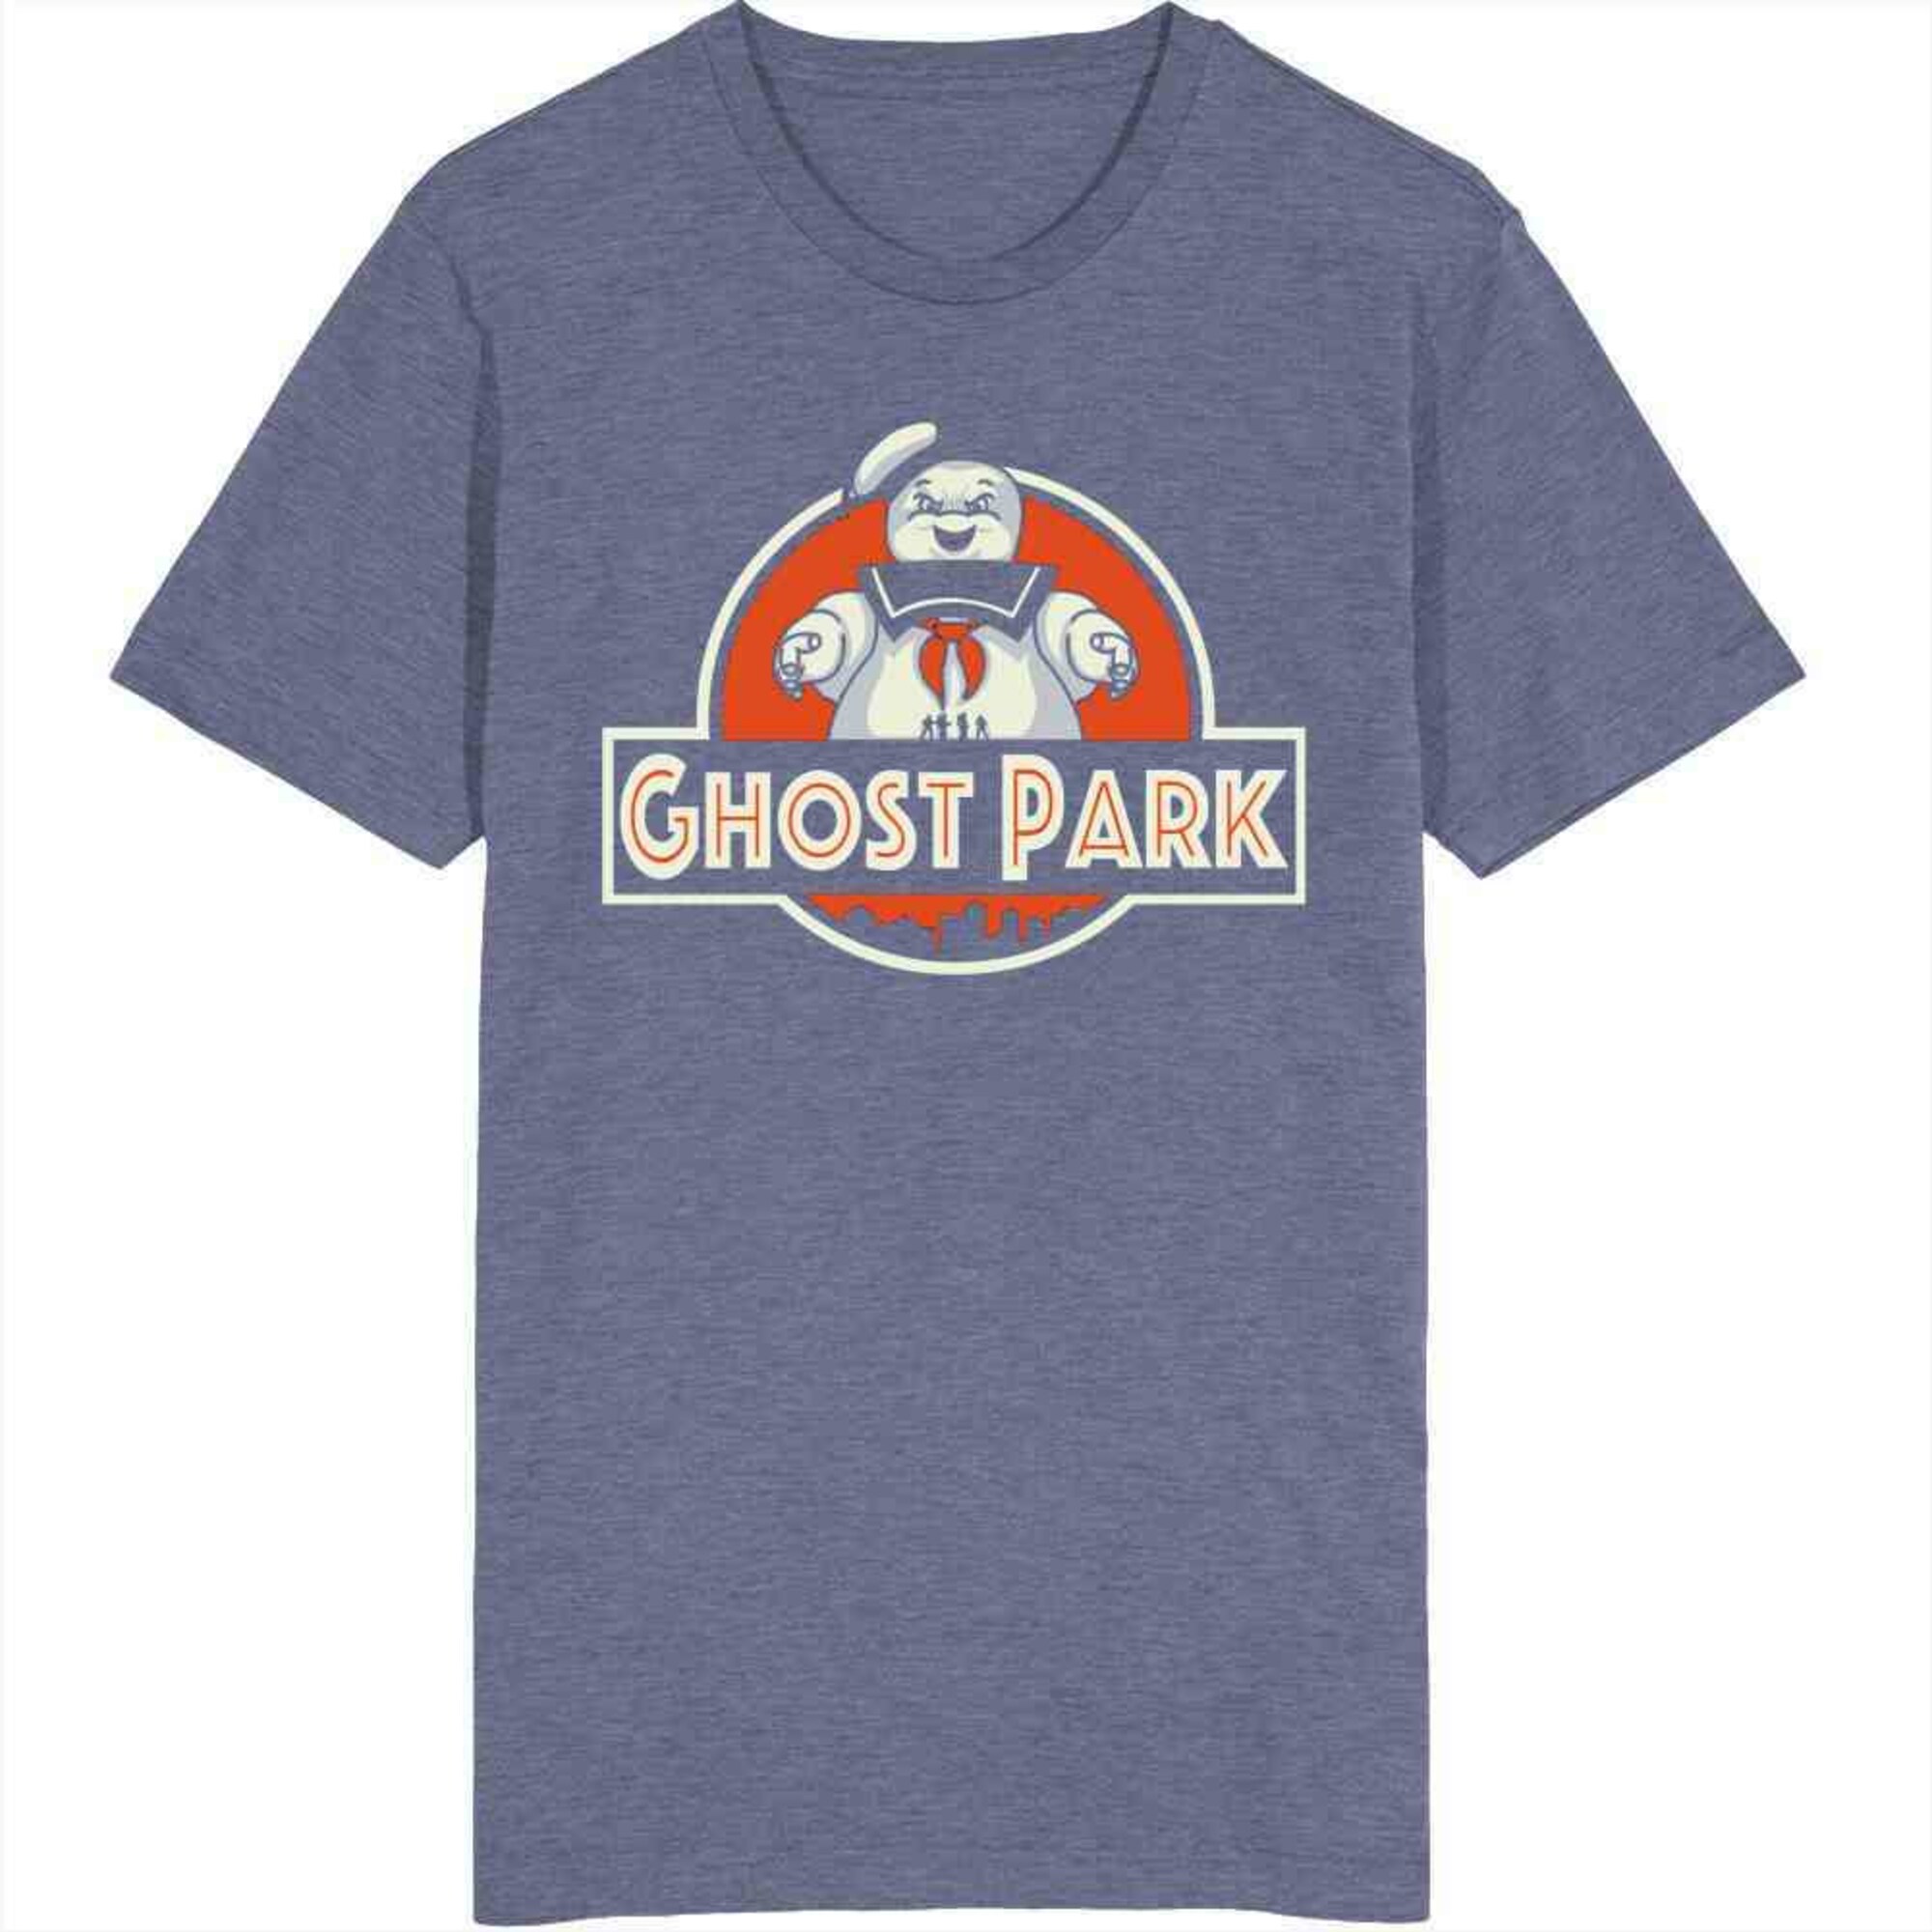 Funny Ghost Park Jurassic Park Logo Mashup Ghost Busters Stay Puft Marshmellow Man T Shirt